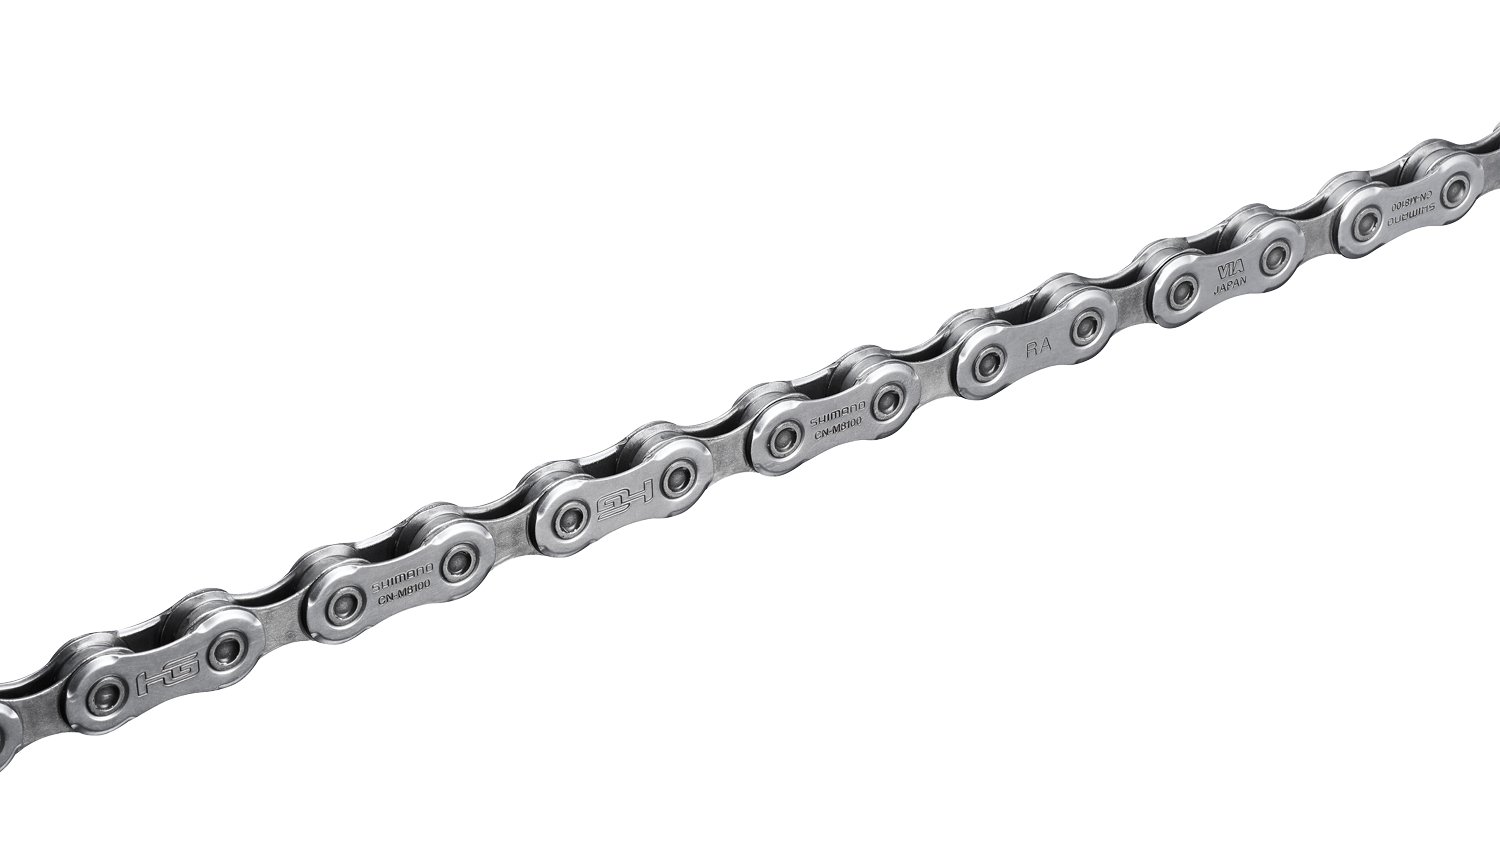 Details about   ZTTO MTB 12 Speed Chain Gold x1 x12 1x12 System Connector Included 126L links 